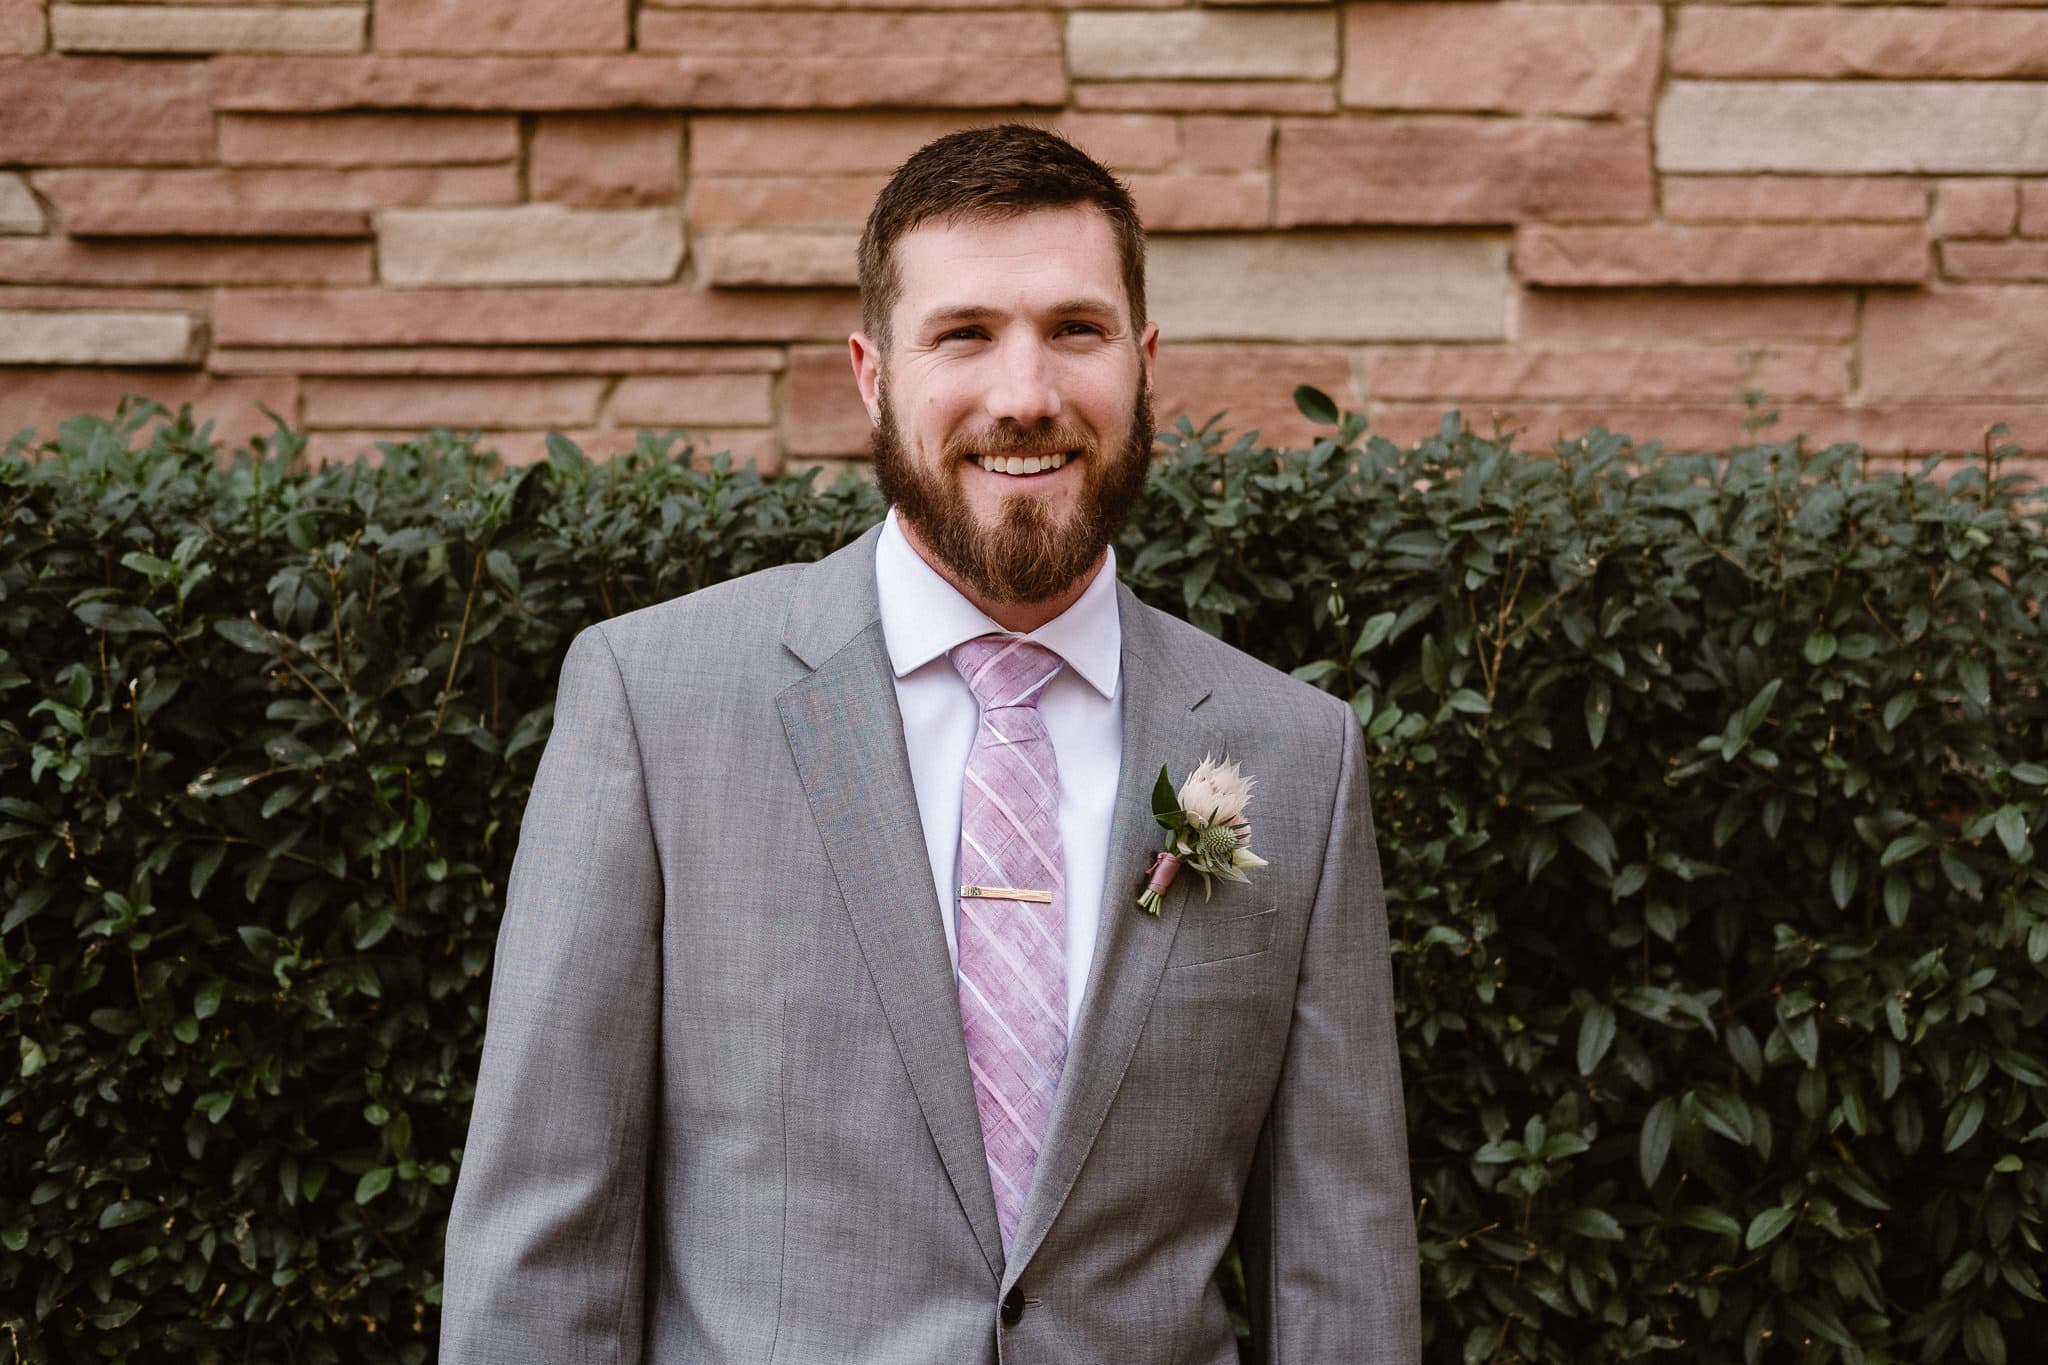 Groom getting ready for Colorado mountain elopement at St. Julien Hotel, Boulder wedding photographer, groom portrait, groom wearing gray suit and pale purple tie